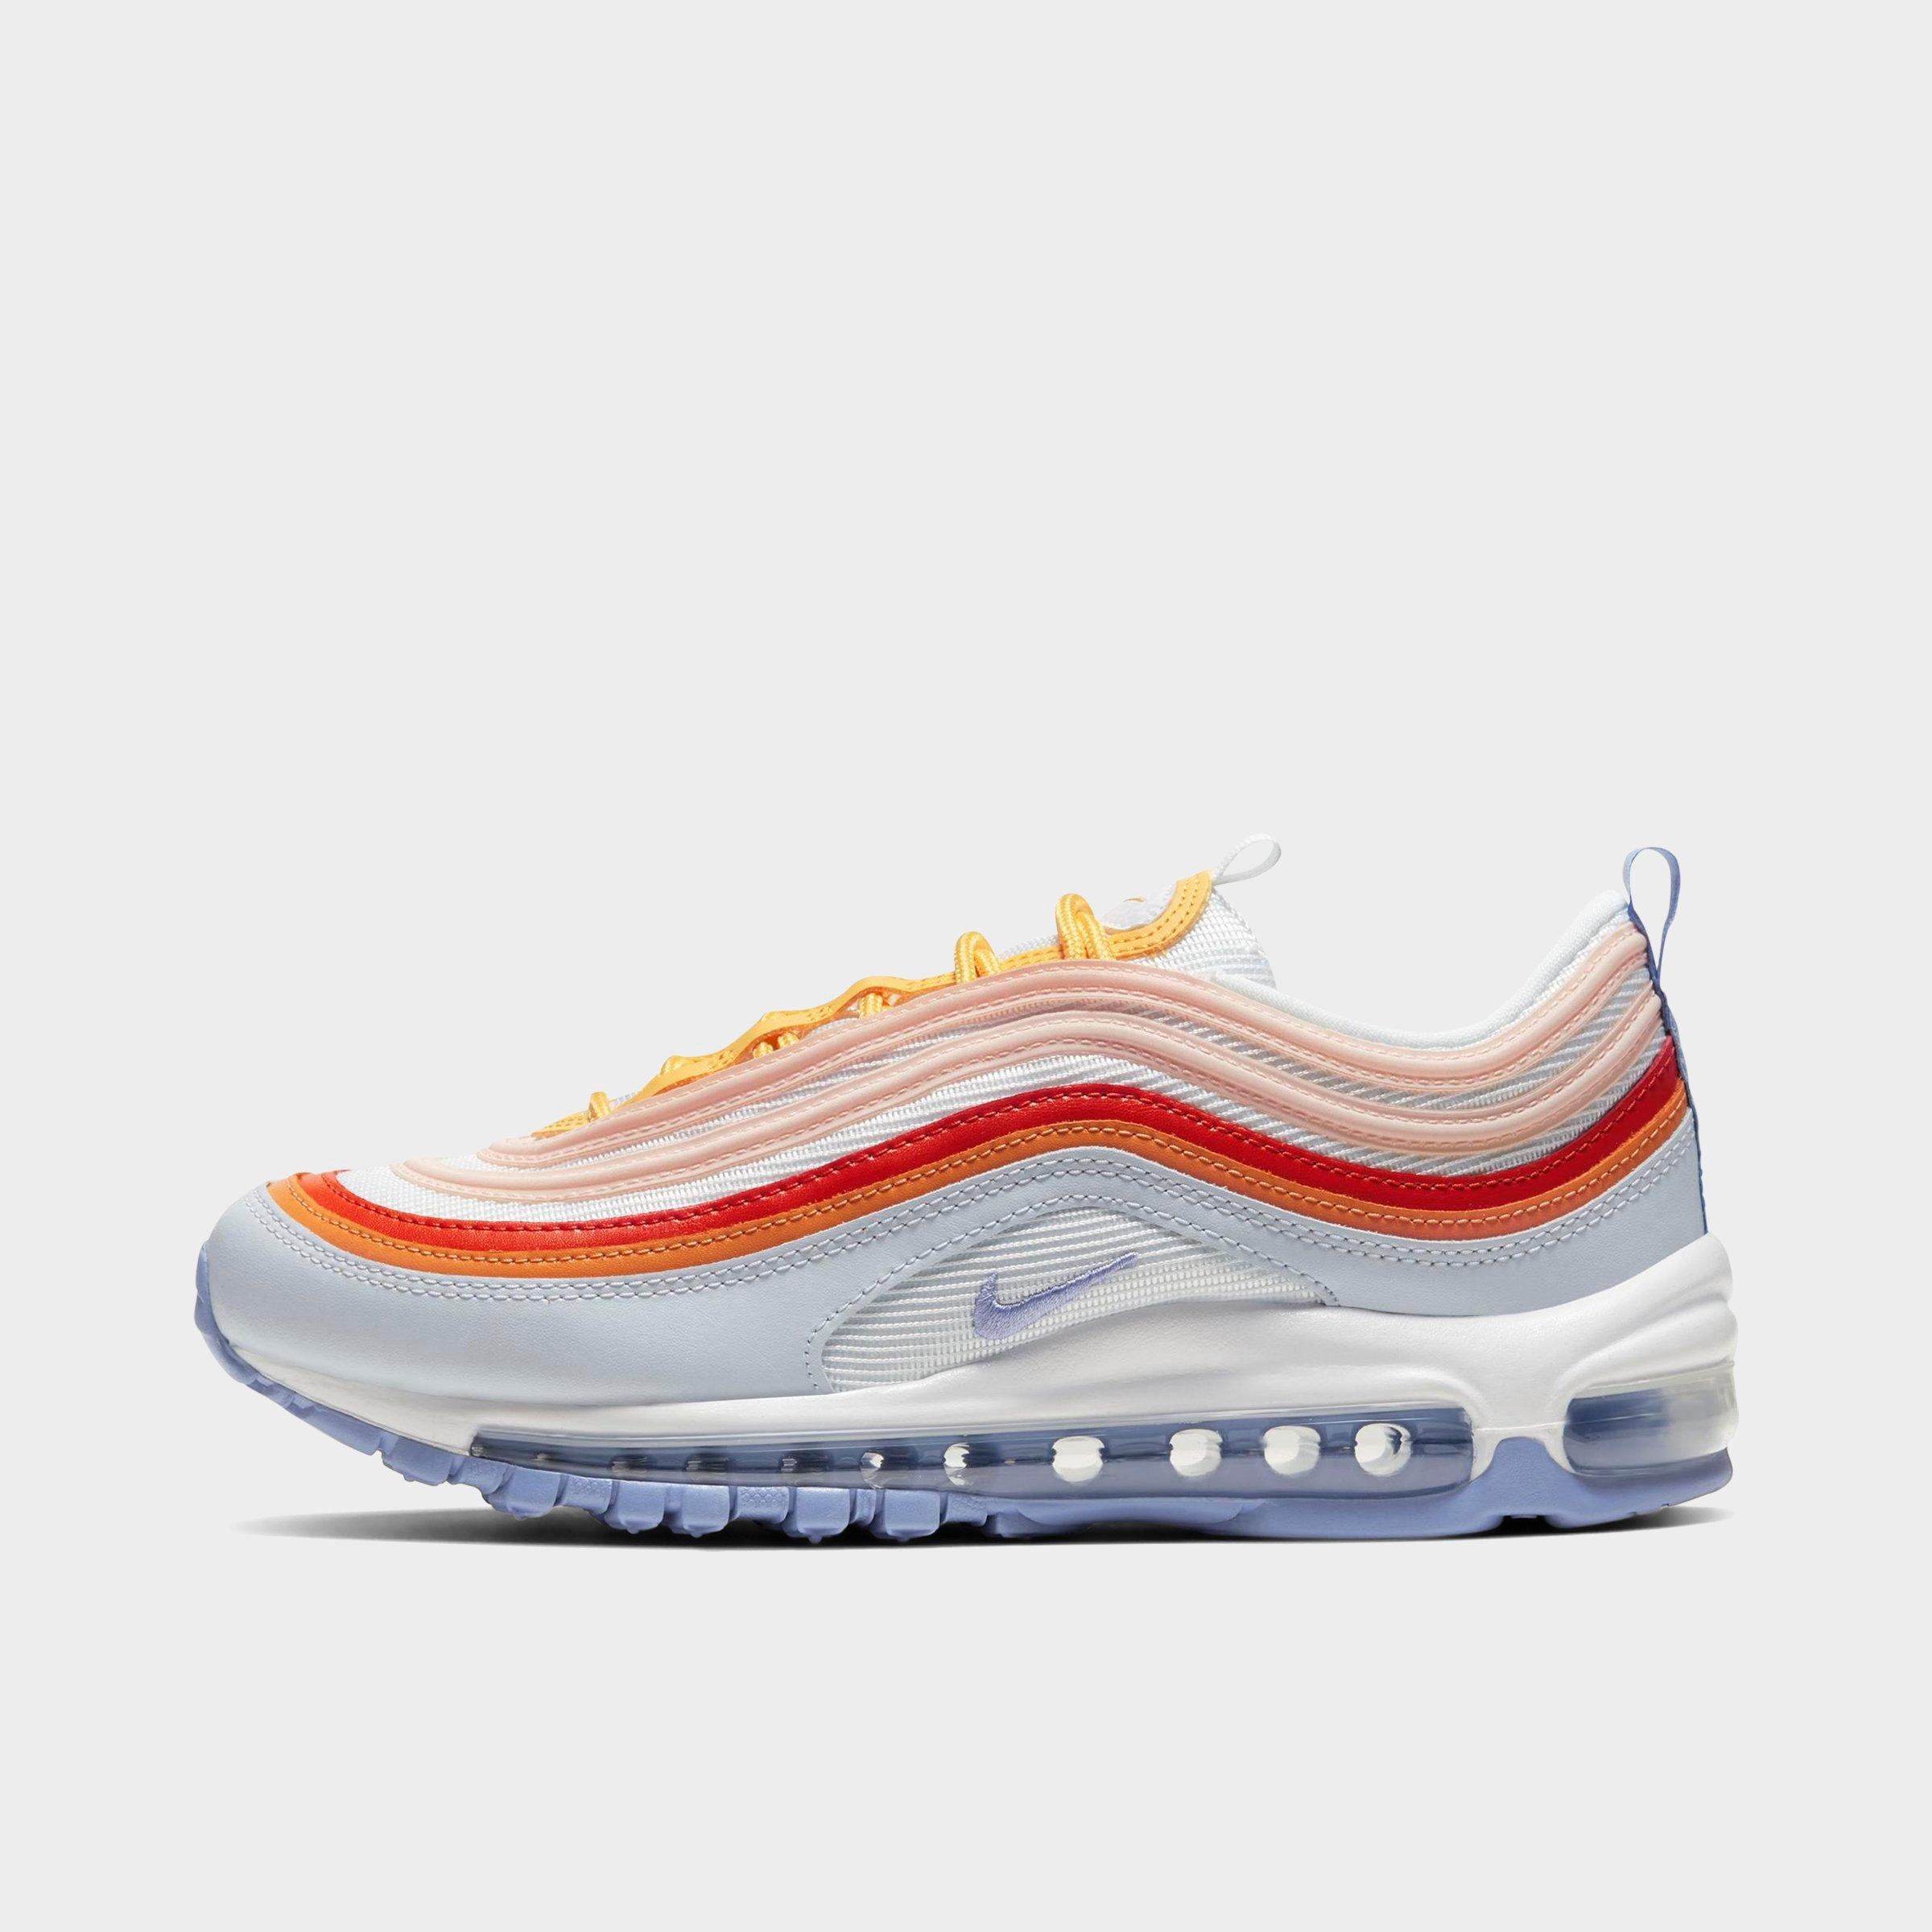 nike air max 97 blue yellow red